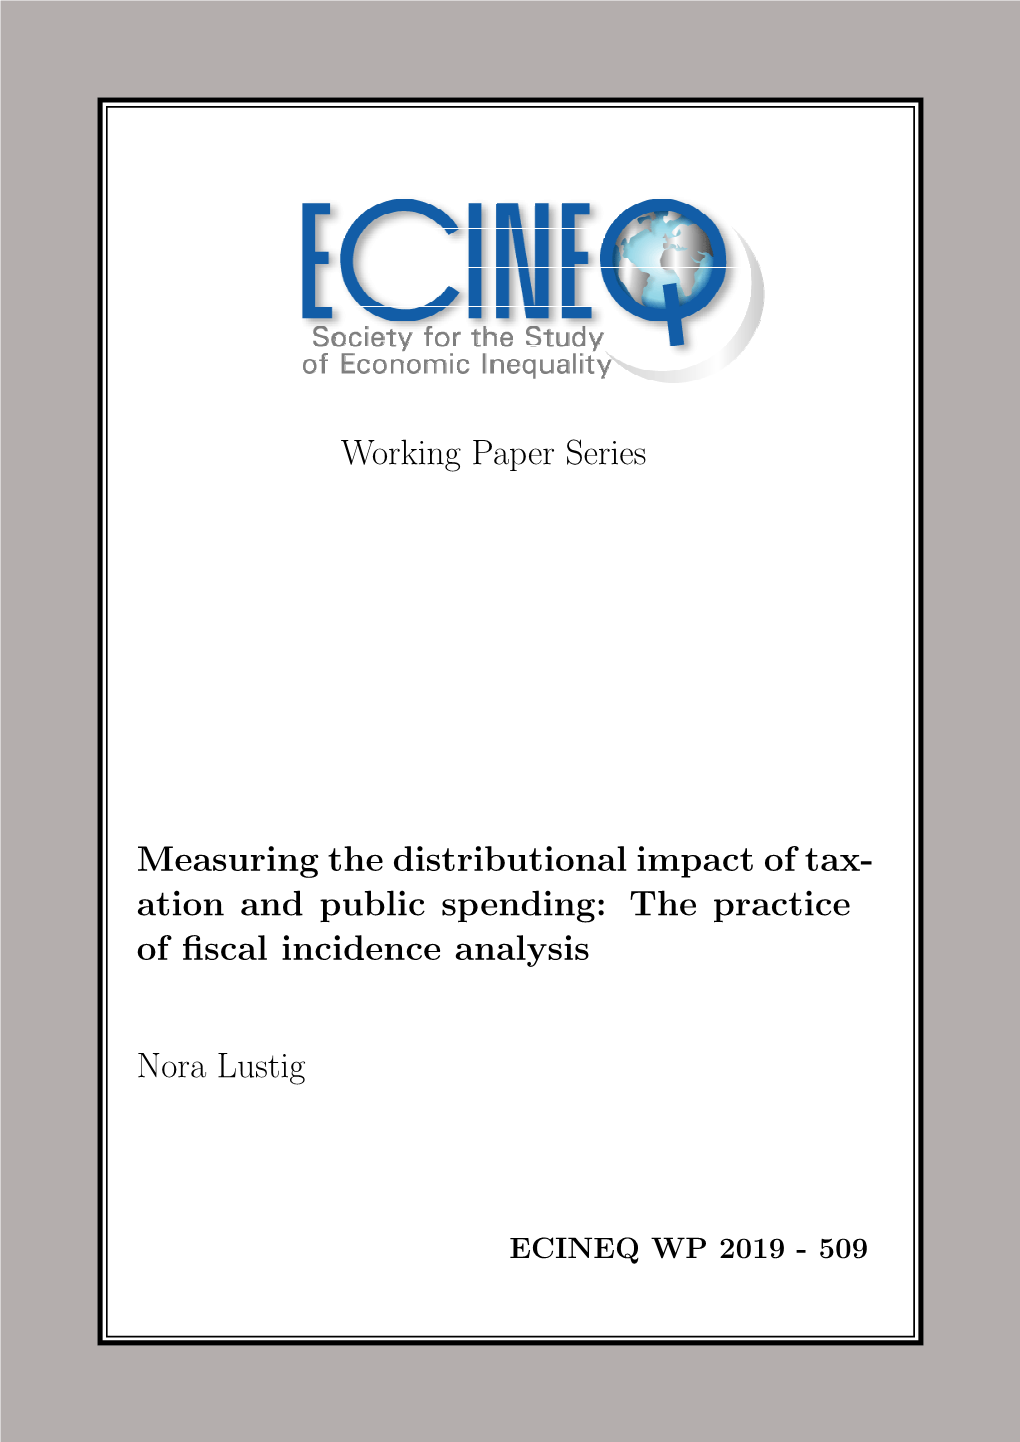 The Practice of Fiscal Incidence Analysis Nora Lustig